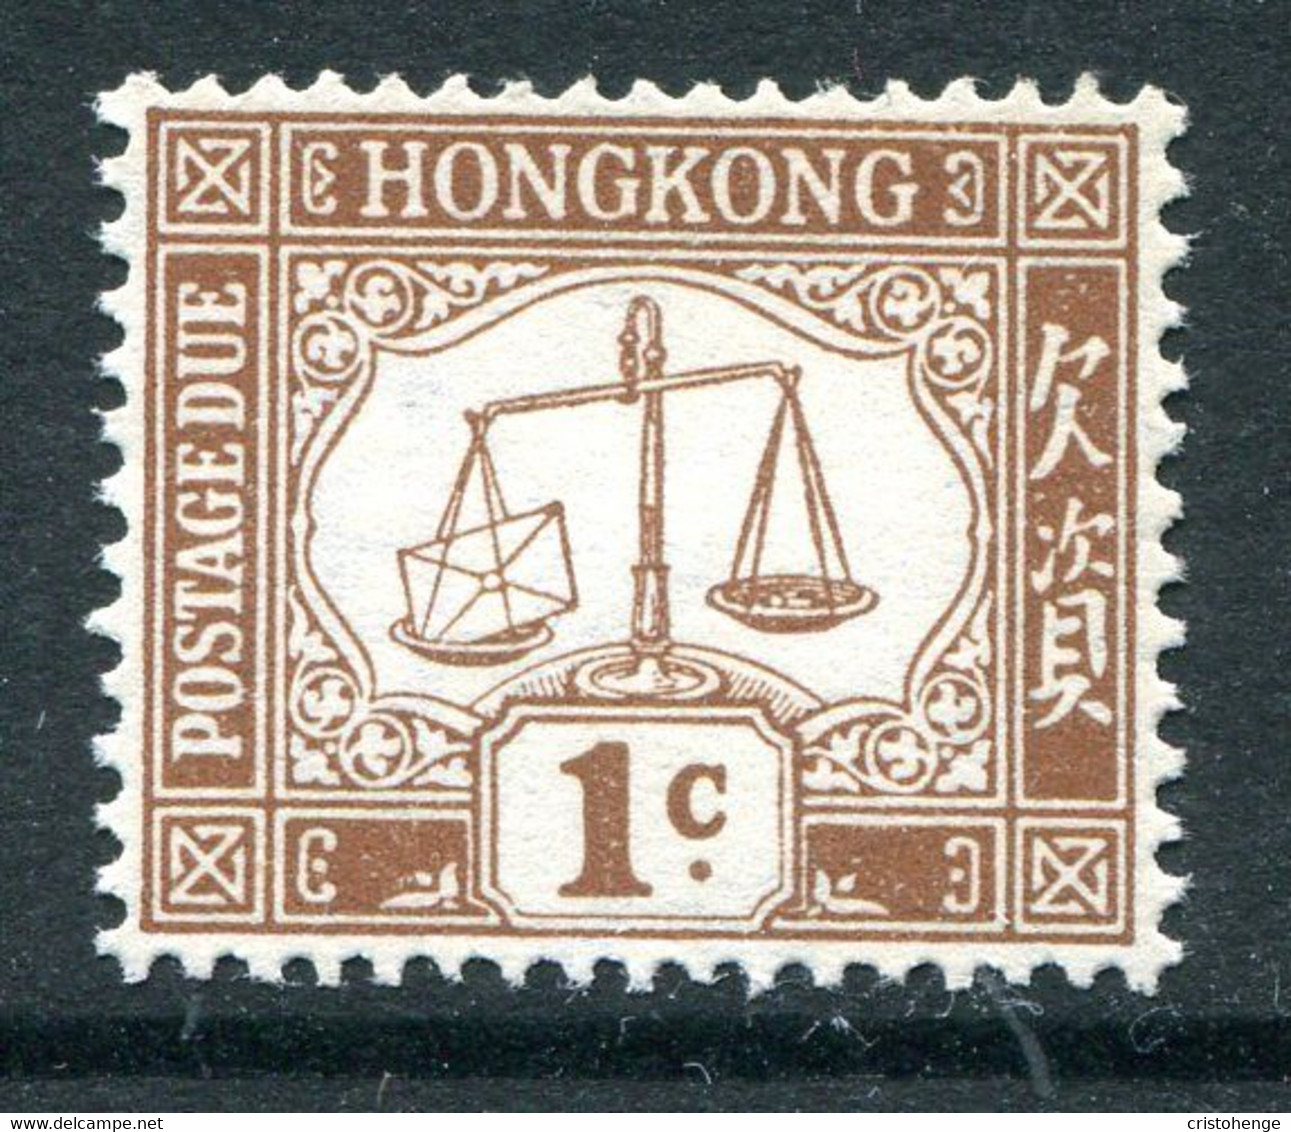 Hong Kong 1923-56 Postage Dues - 1c Brown - Wmk. Sideways - MNH (SG D1a) - Postage Due